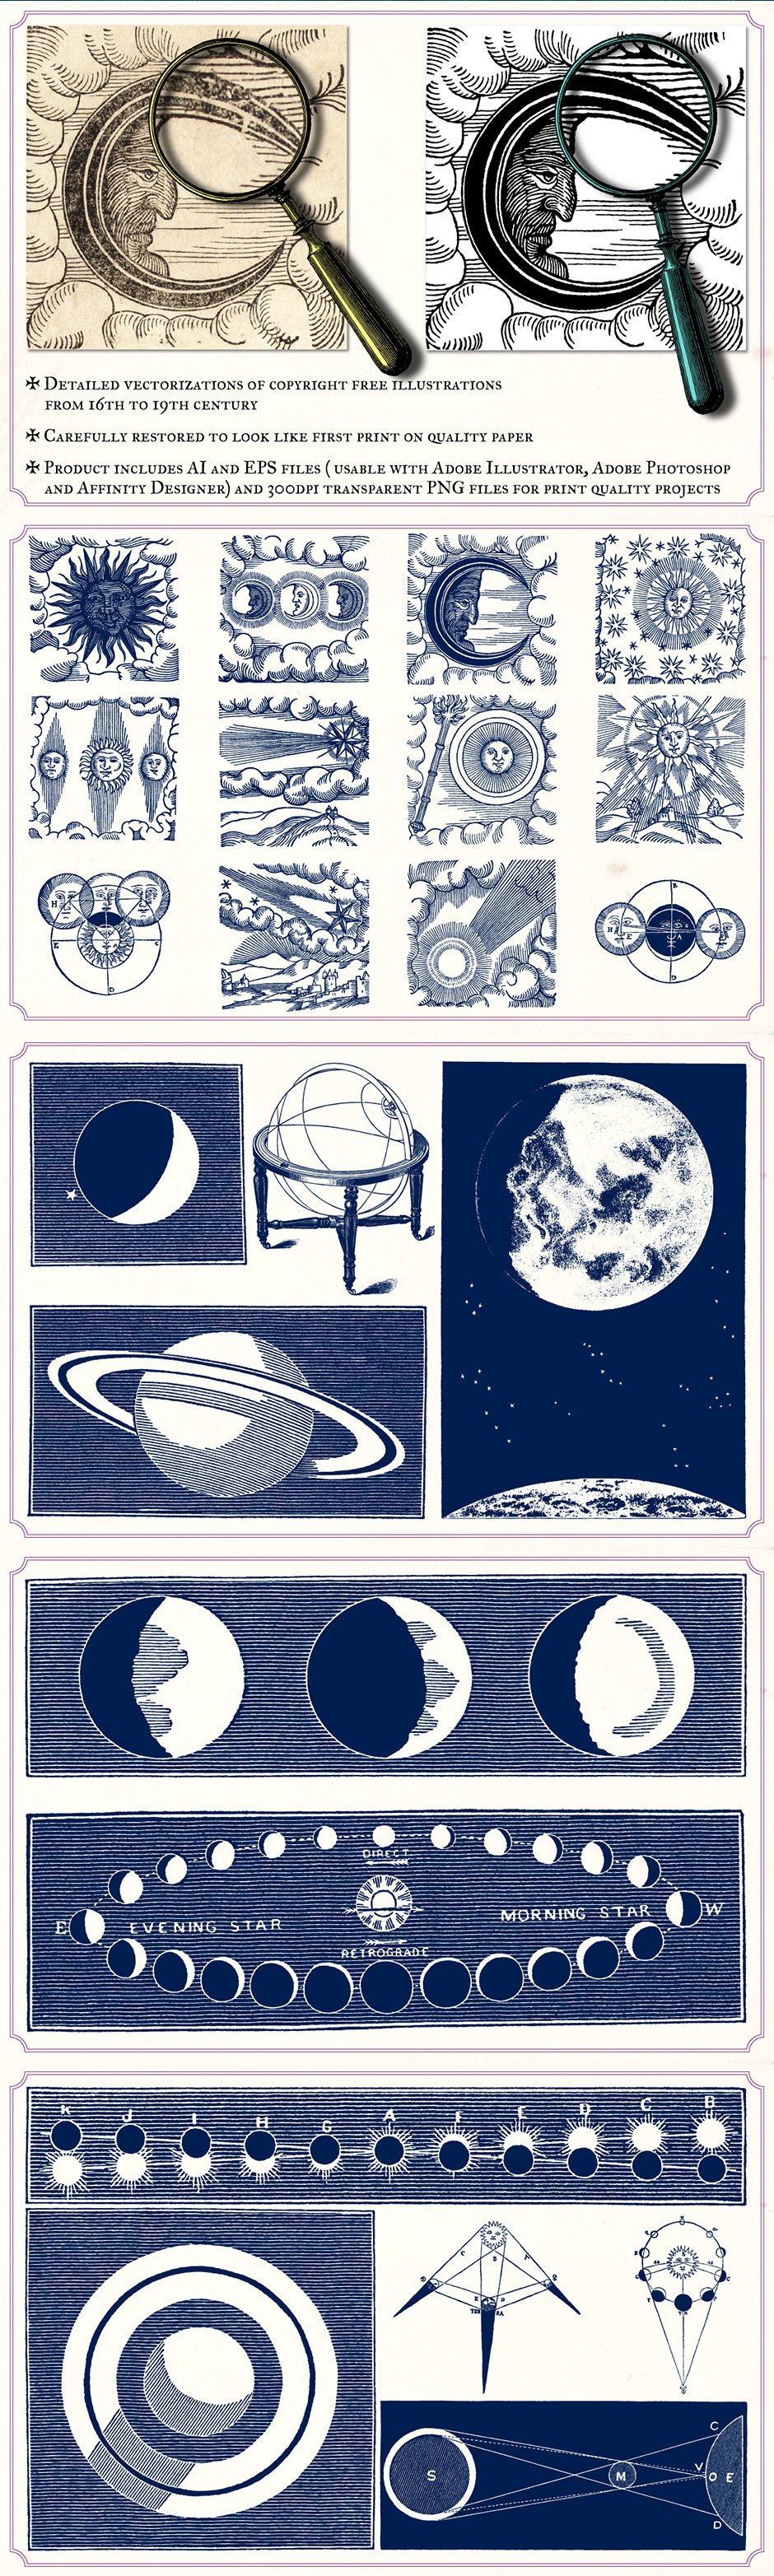 vintage space and astronomy illustrations